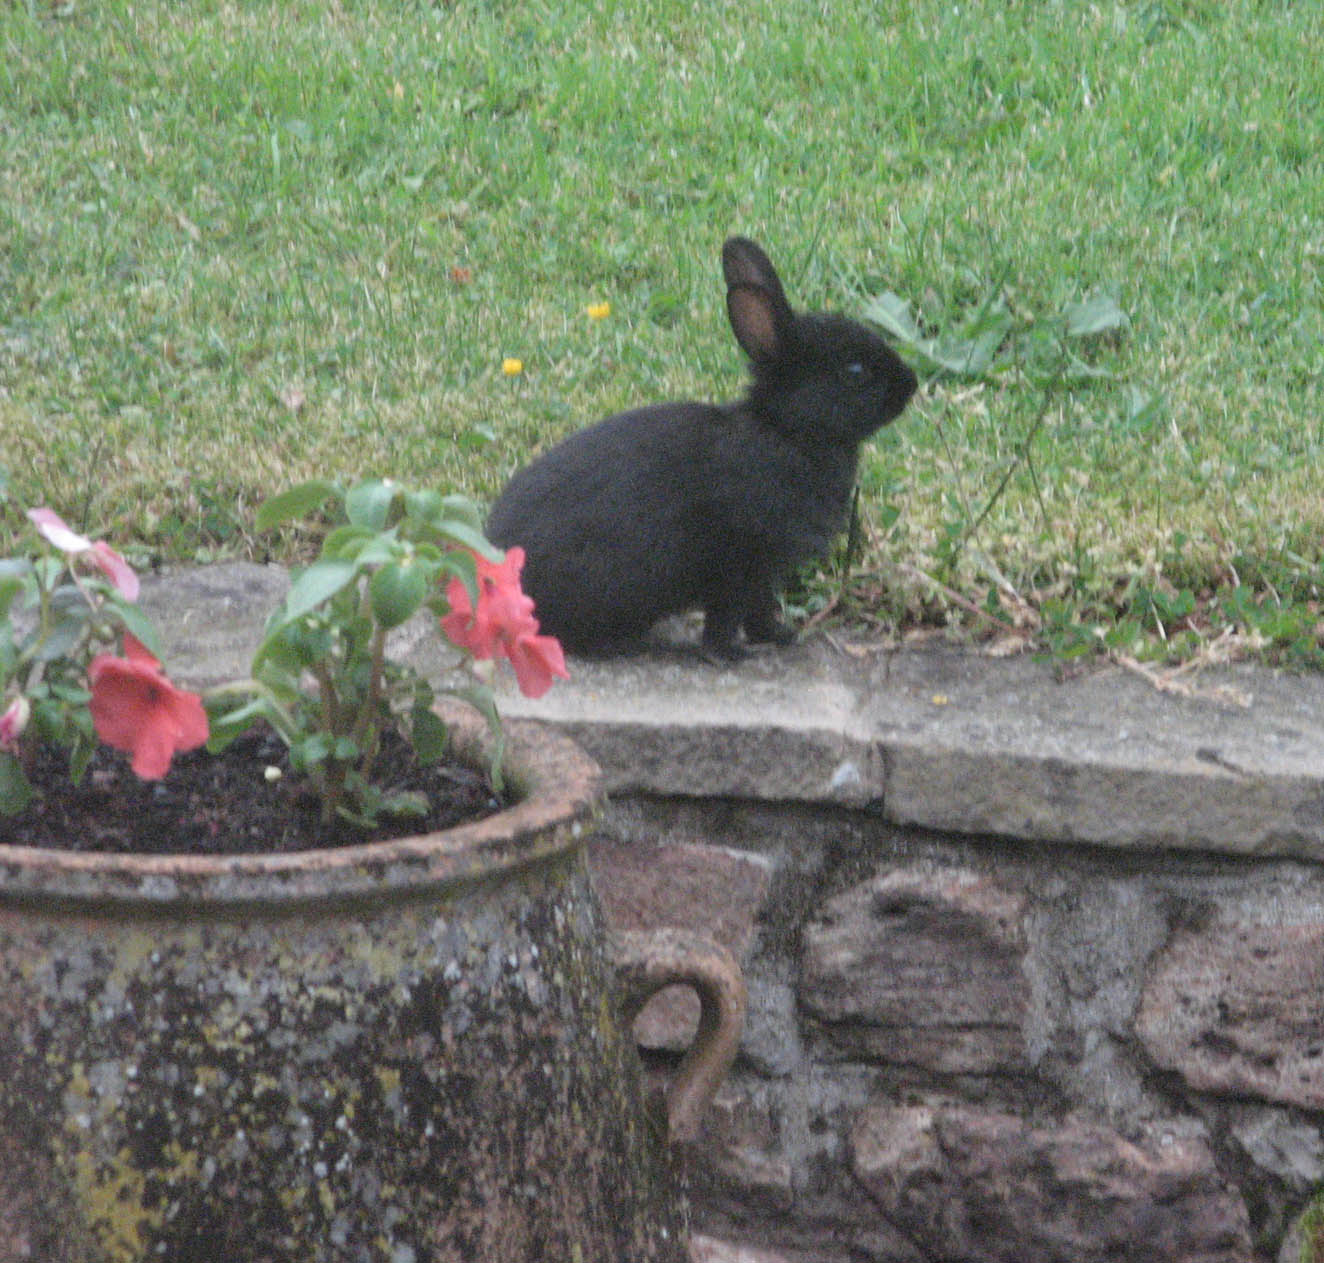 young black rabbit sitting at the edge of grass, facing right: between it and the viewer are part of a low stone wall and a large stone or concrete planter with pink flowers